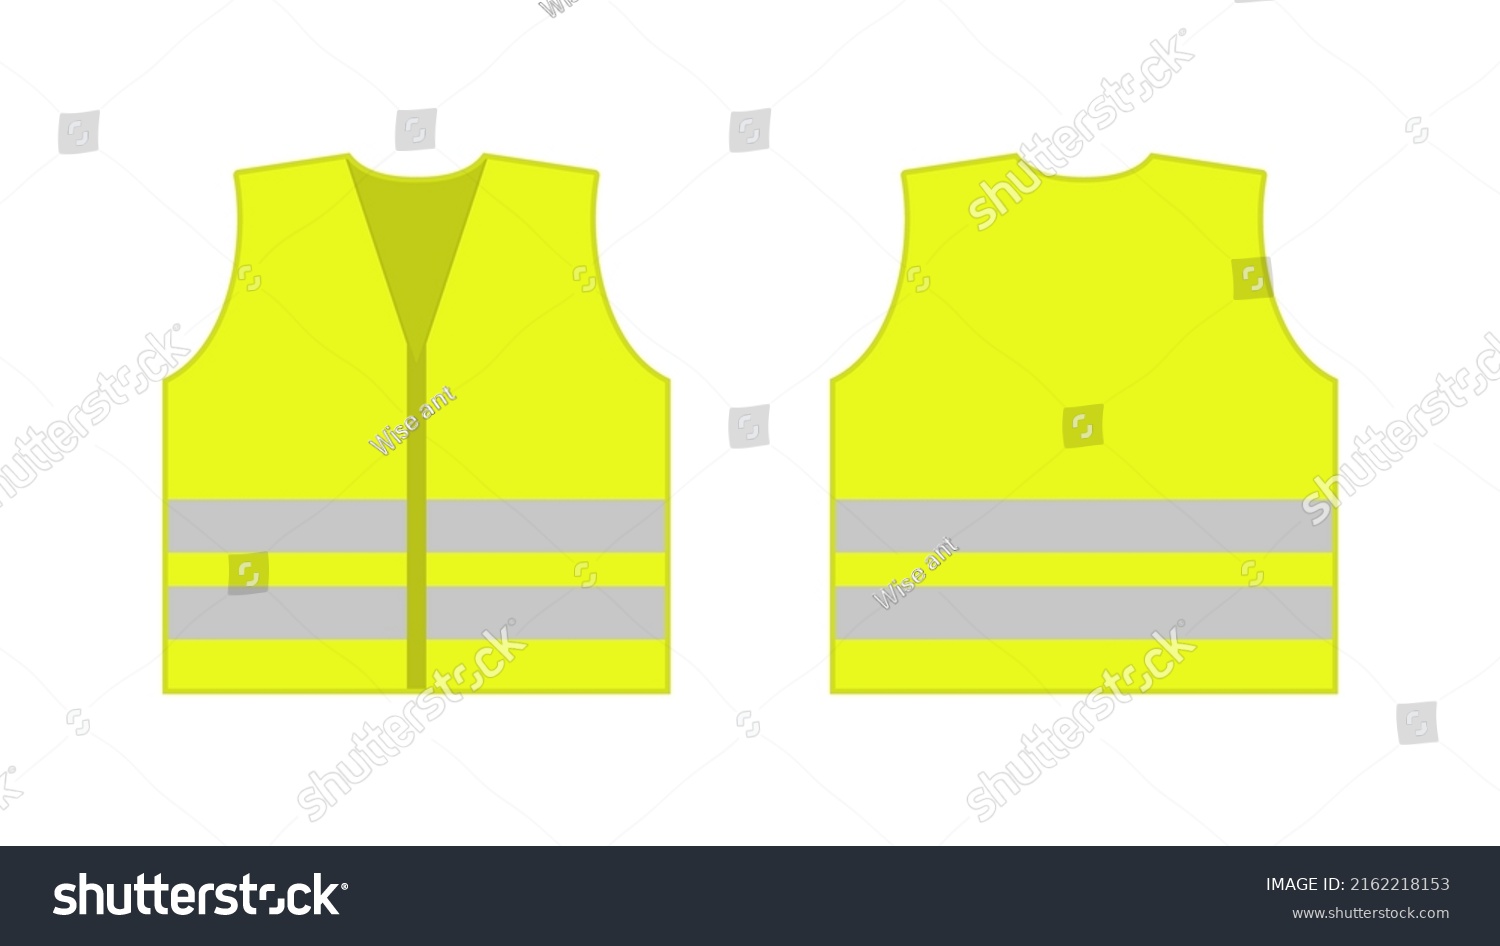 SVG of Vis vest. Visible jacket. Yellow visible vest for safety. Jacket for construction, police and security. High visibility of waistcoat. Reflective uniform for protection. Vector. svg